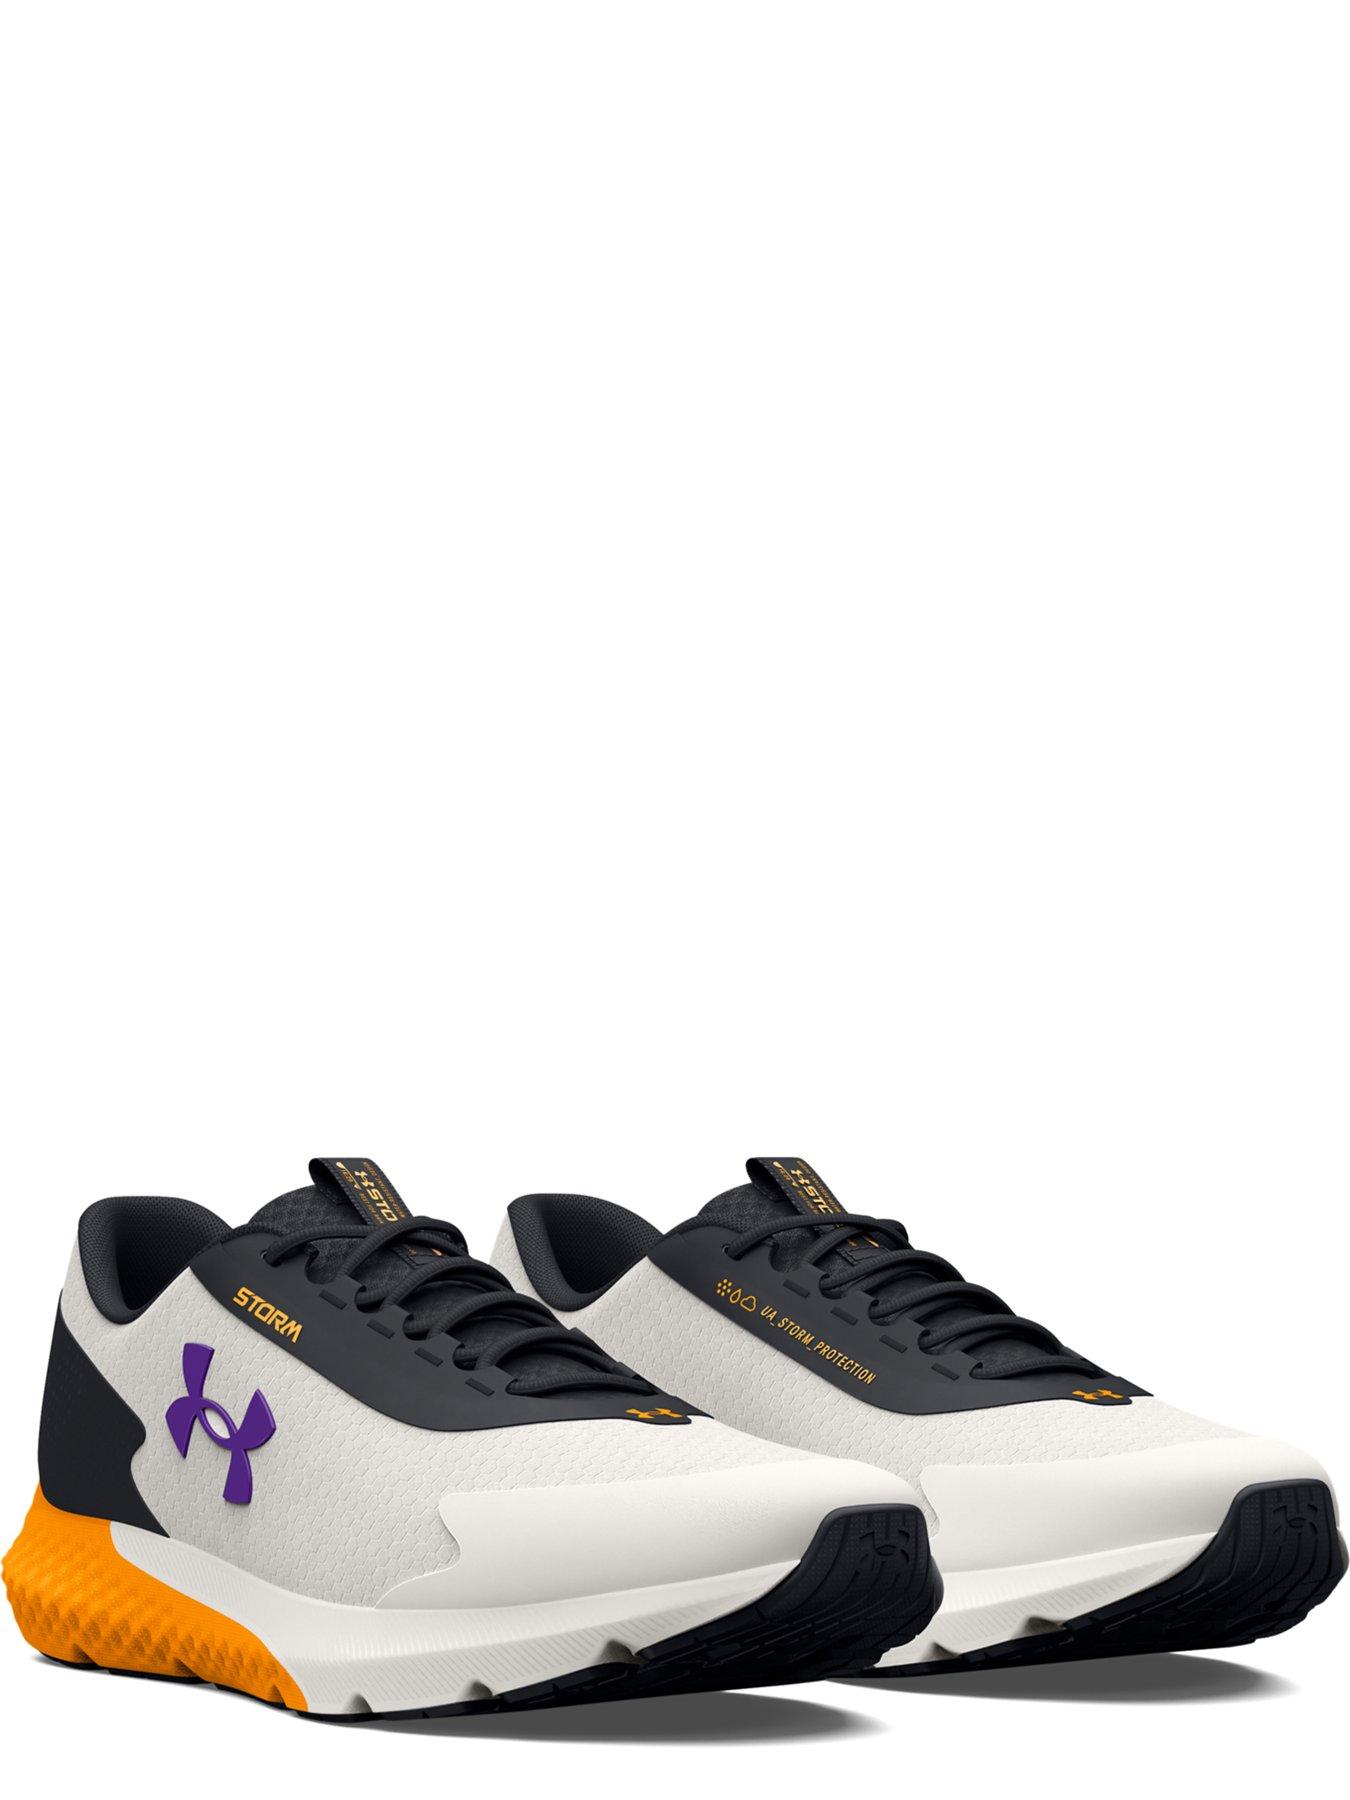 UNDER ARMOUR Charged Rogue 3 Storm Trainers - White